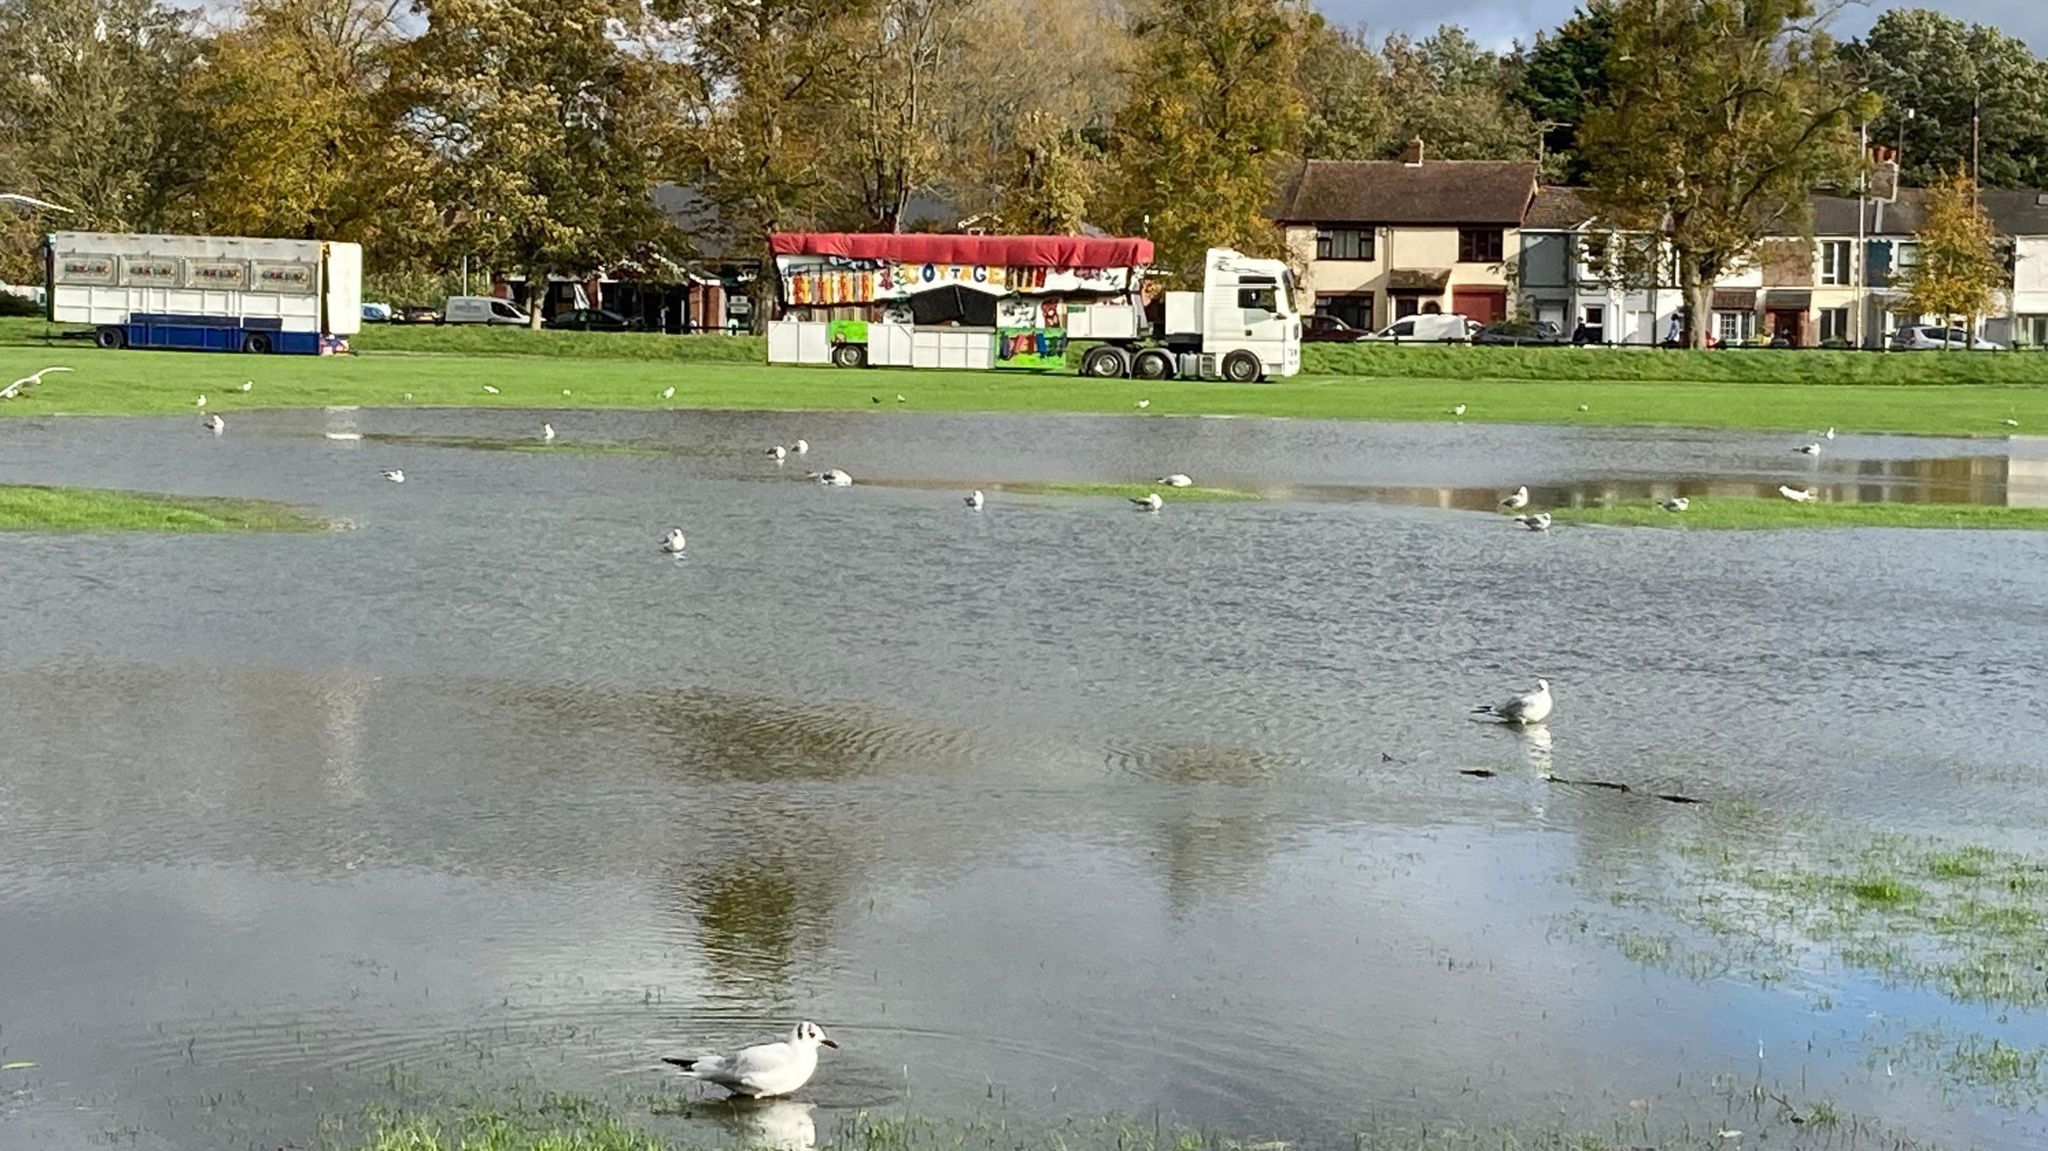 Flooding at The Walks in King's Lynn